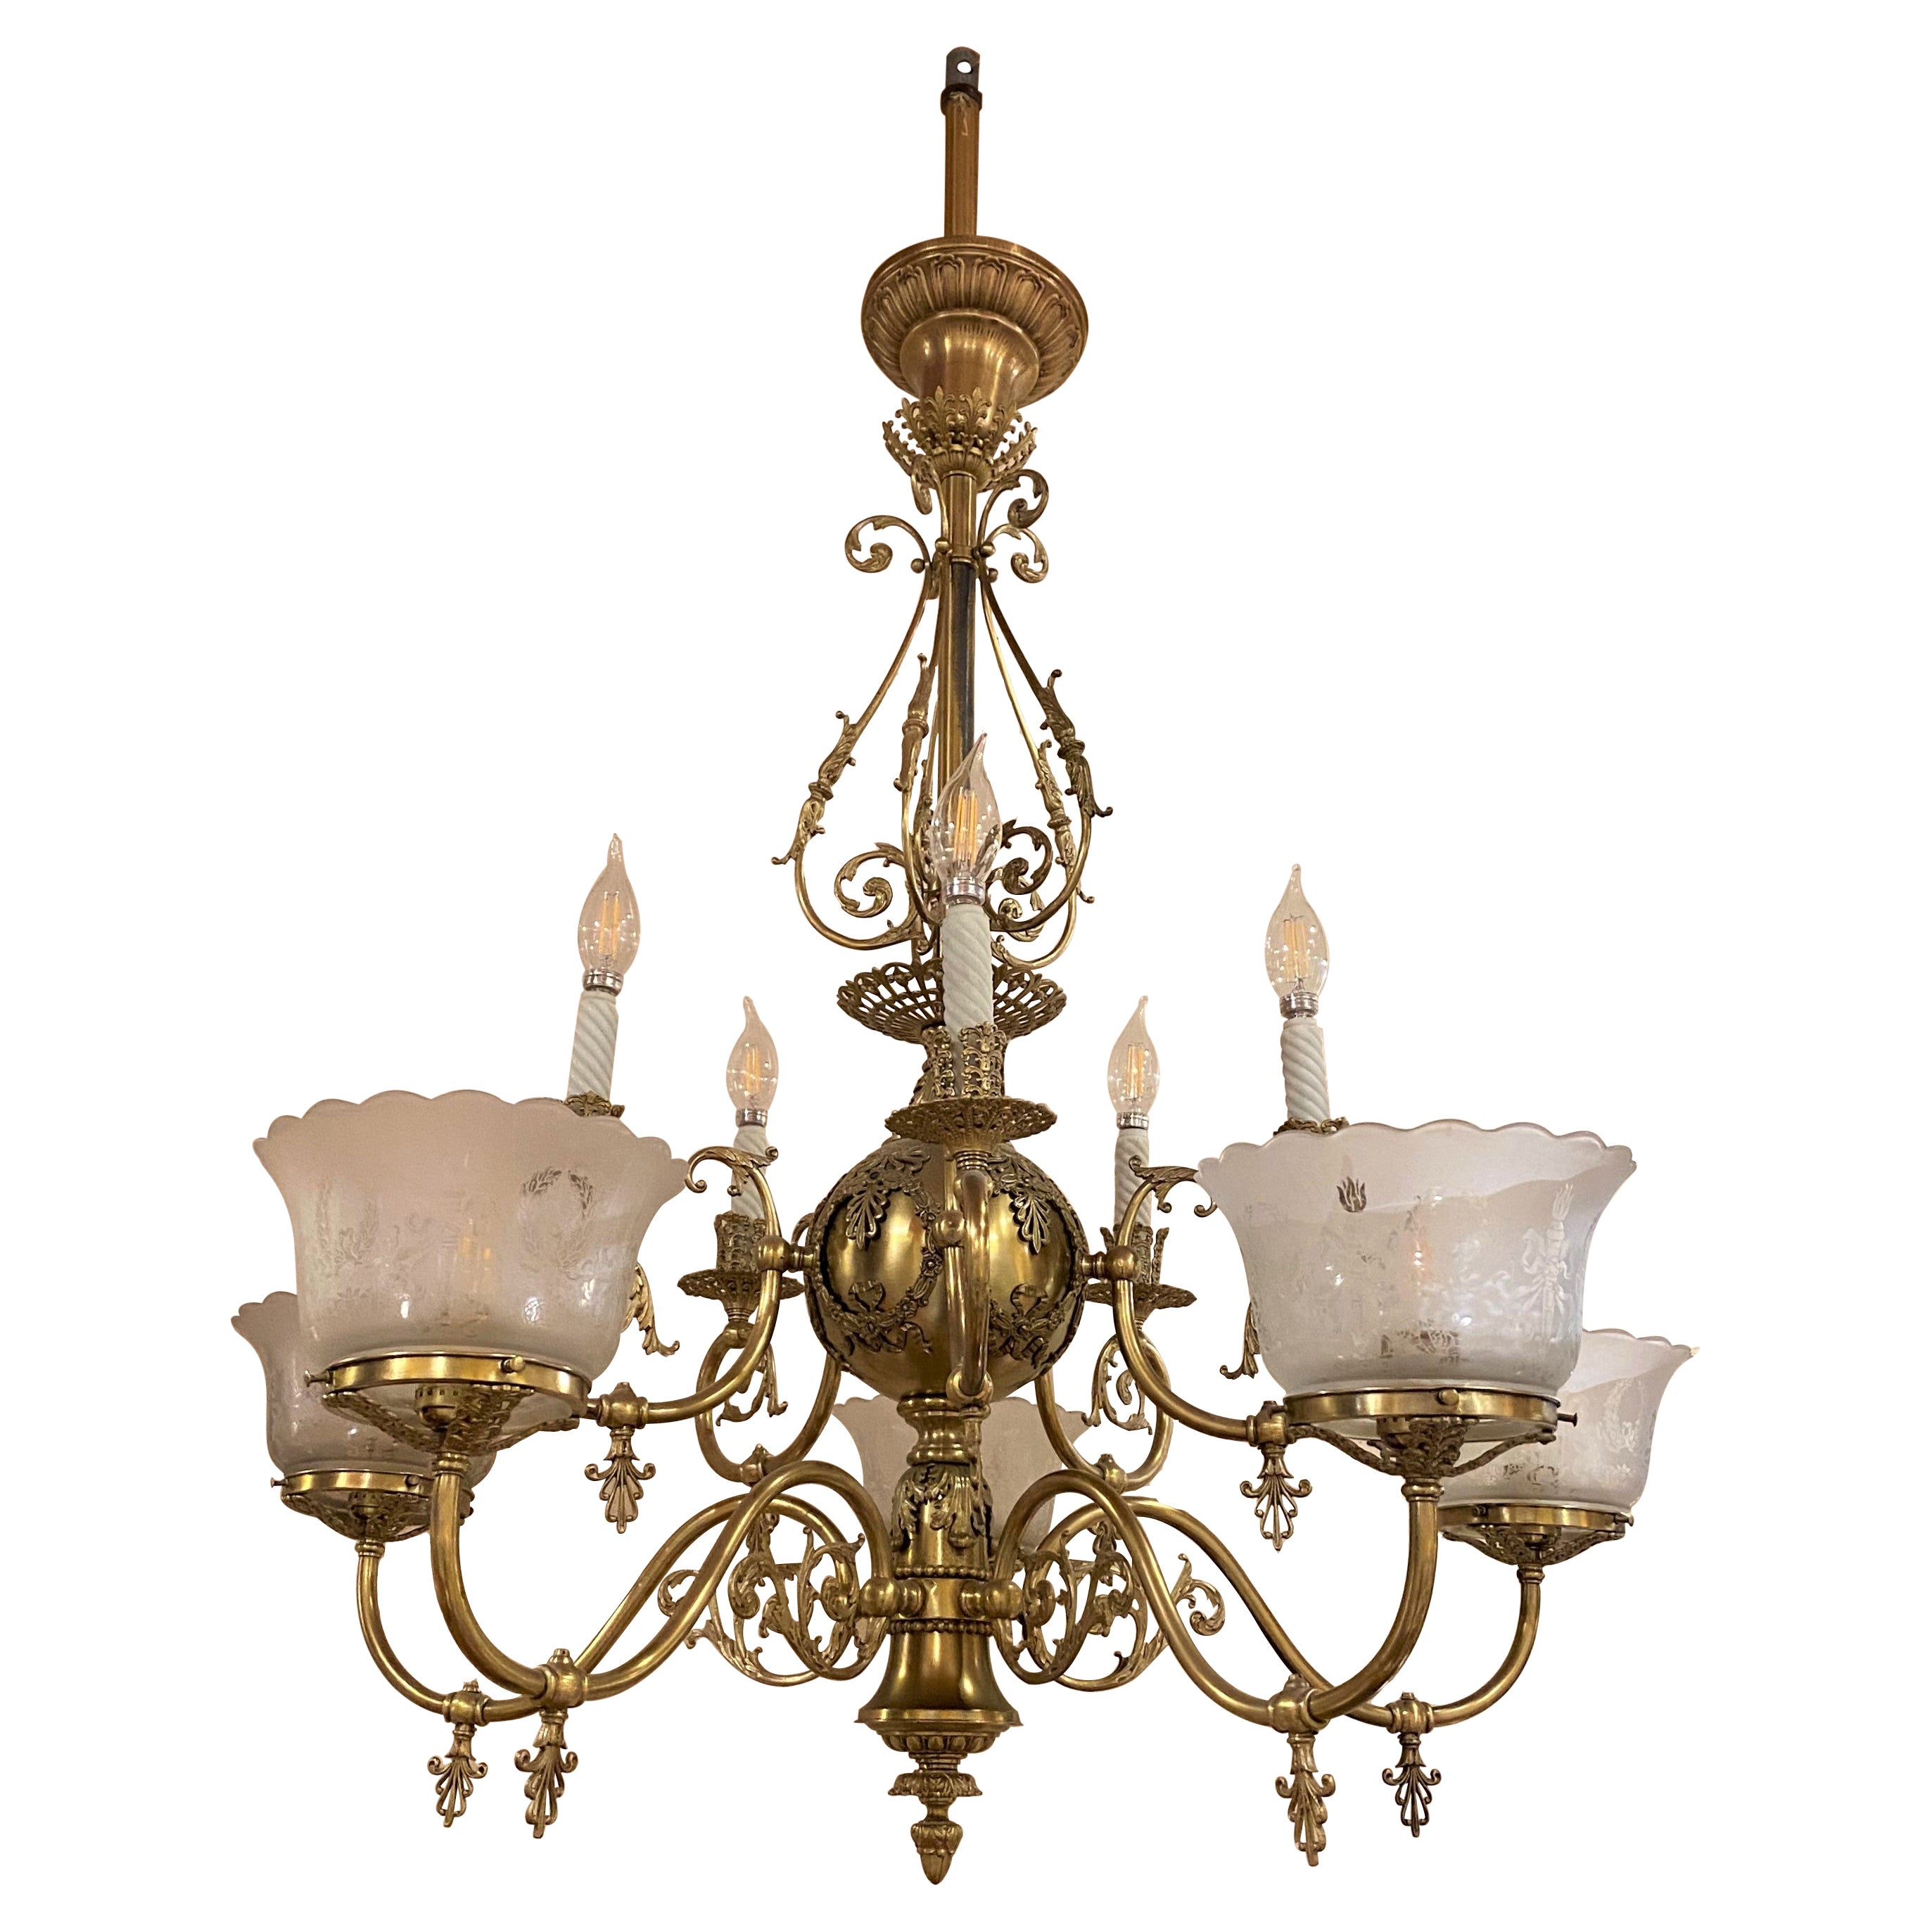 Fine 10-Light Brass Gasolier / Chandelier Electrified with 5 Etched Shades